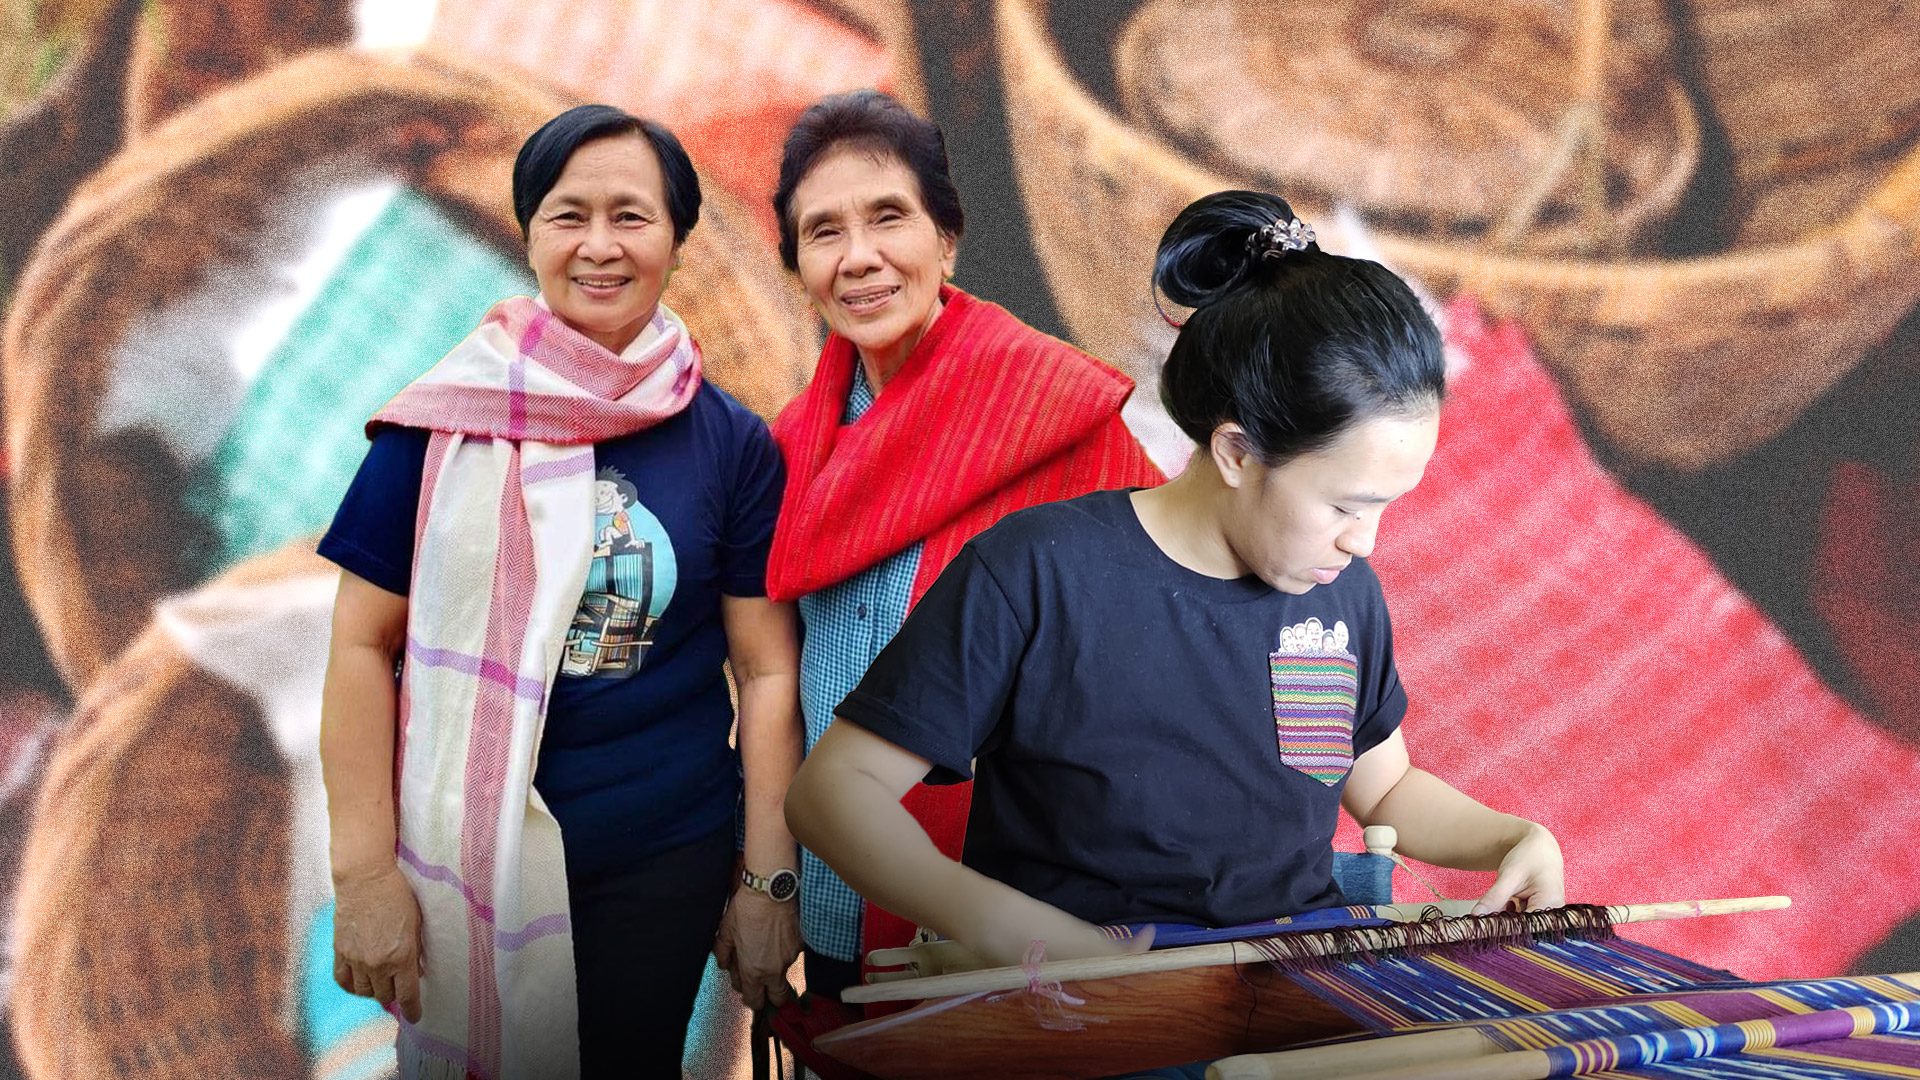 Hand-woven history: How one woman’s DIY project revived lost art of weaving in her hometown